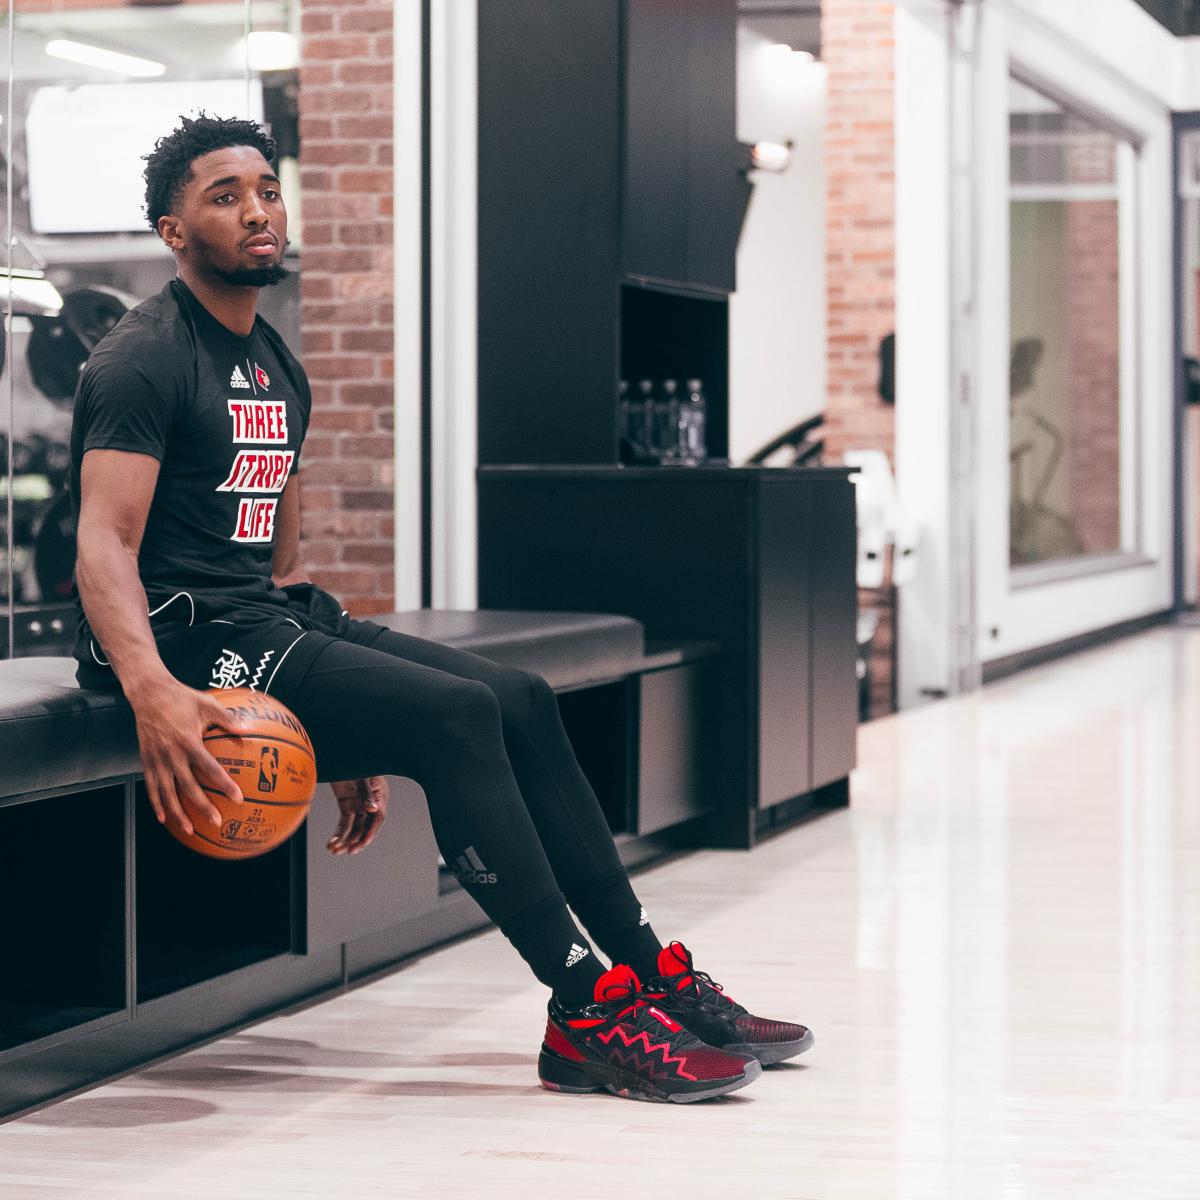 Donovan Mitchell Donating Up to $200k in 'A Shoe for Change' Sales